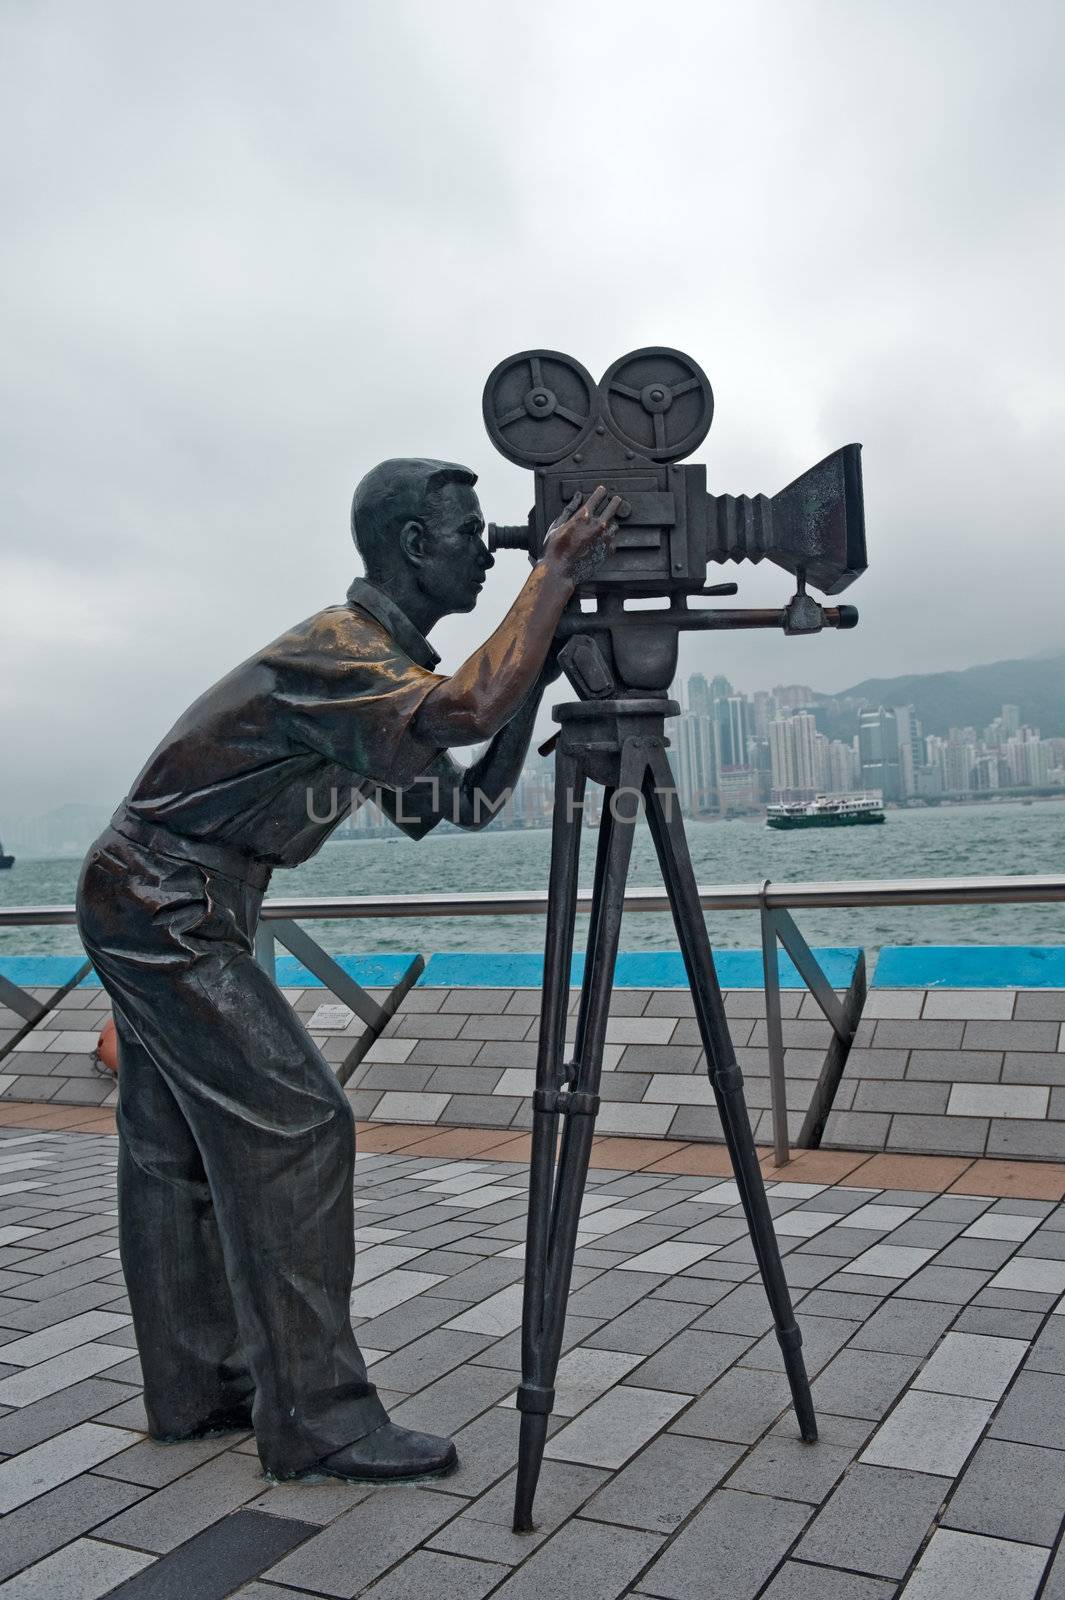 Cameraman statue by Marcus